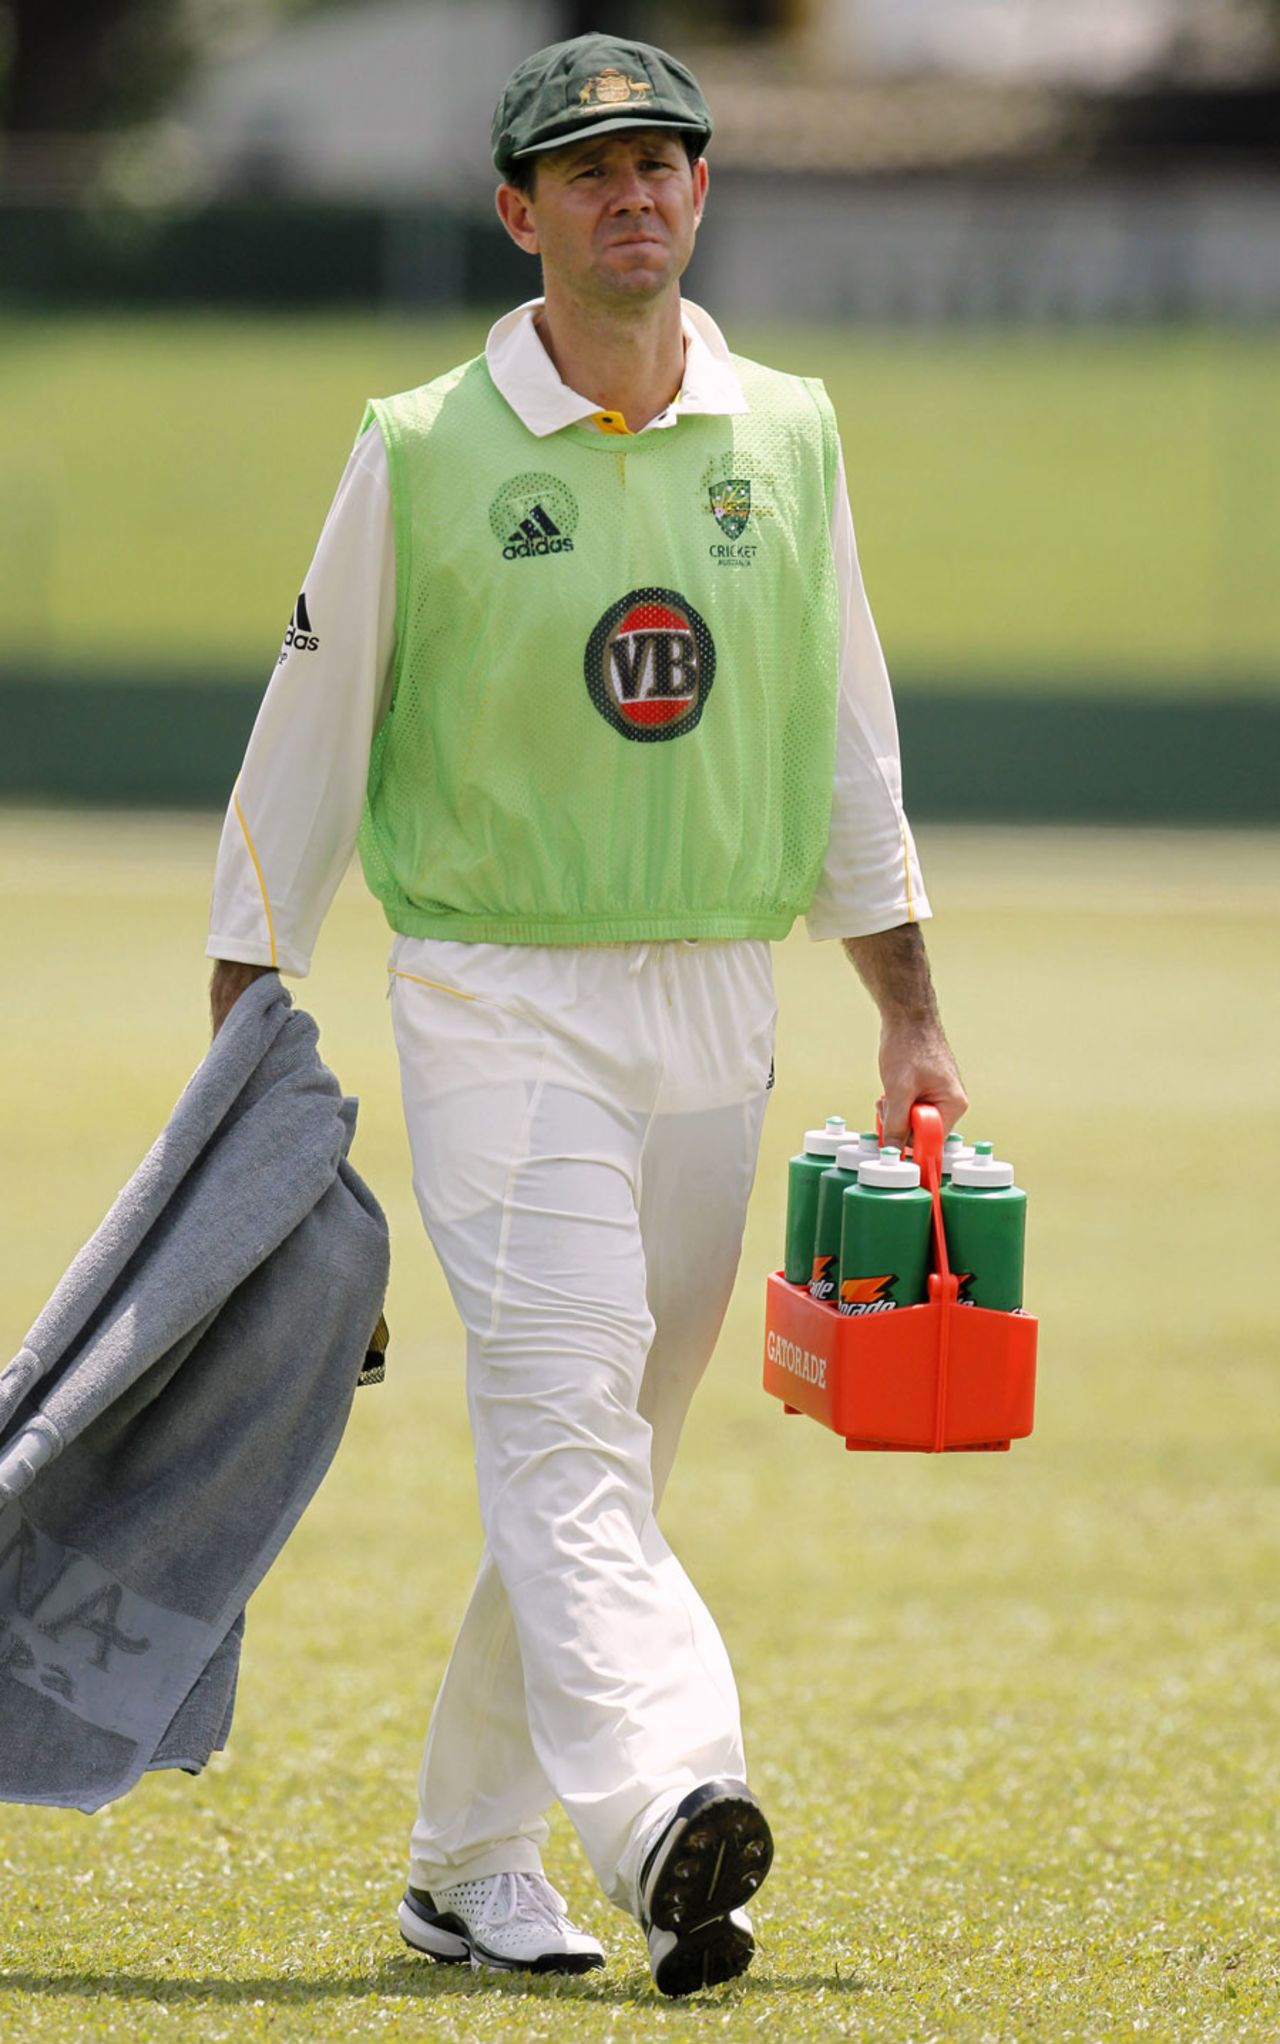 Ricky Ponting carries the drinks for his team-mates, Sri Lanka Board XI v Australians, Colombo, 1st day, August 25, 2011 